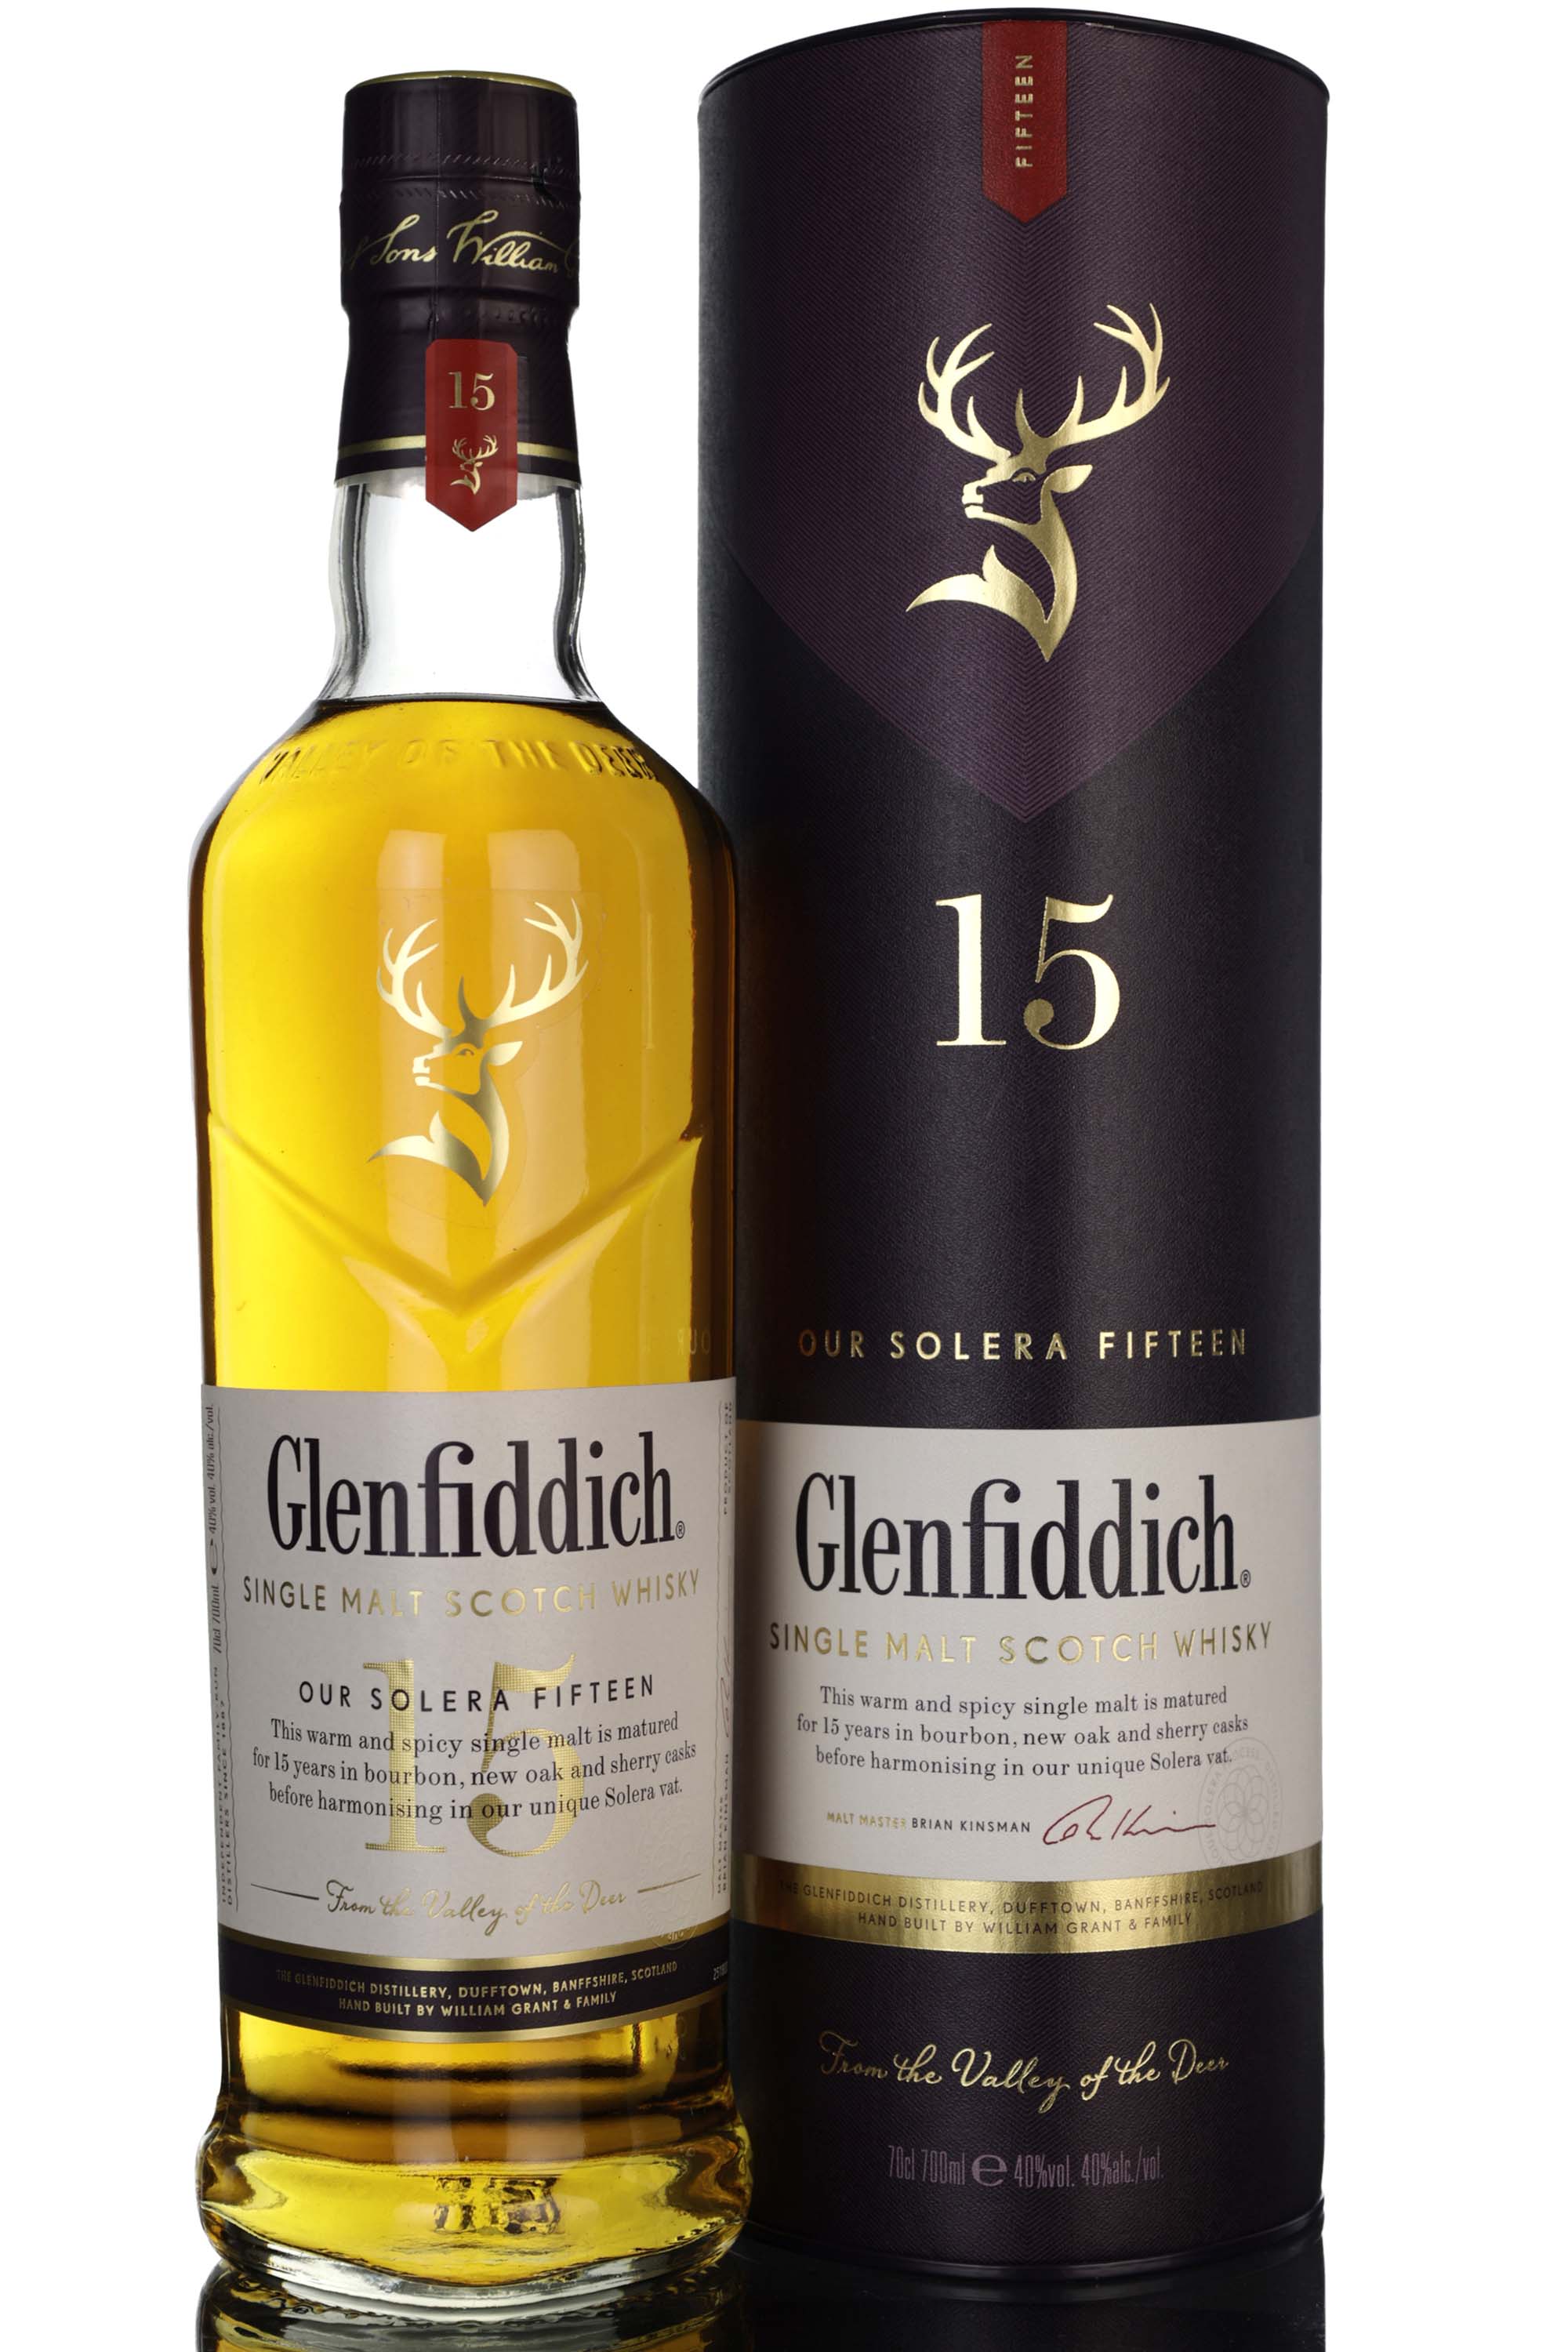 Glenfiddich 15 Year Old - Our Solera Fifteen